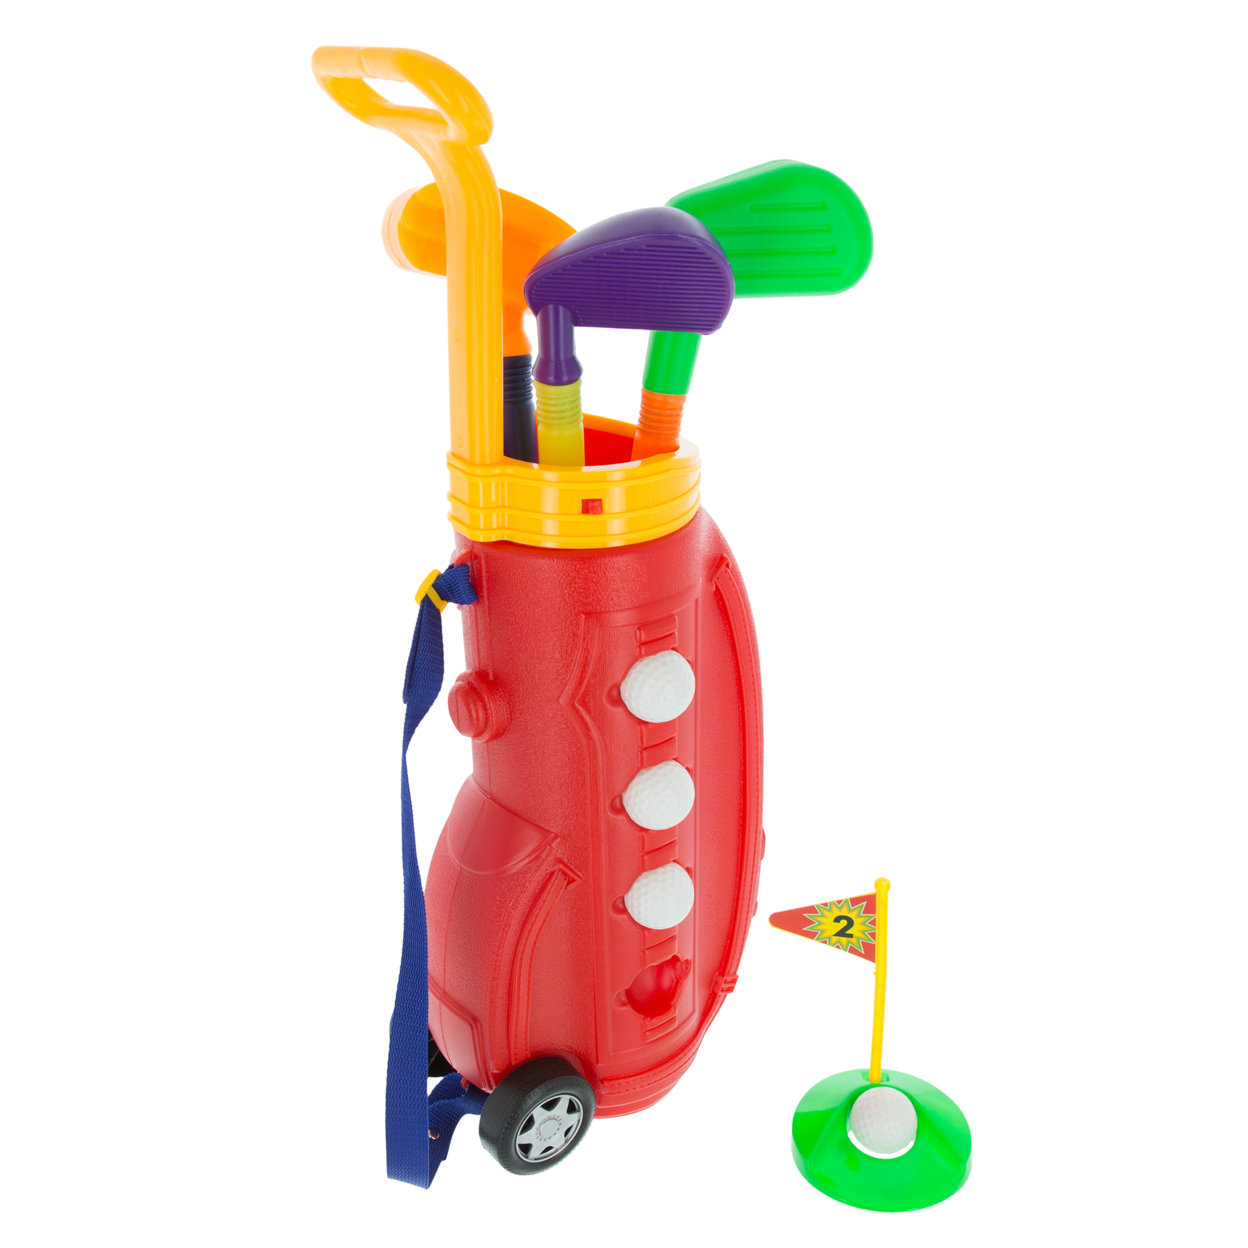 Toddler Toy Golf Club Play Set With Plastic Bag Wheels Clubs Putter Balls